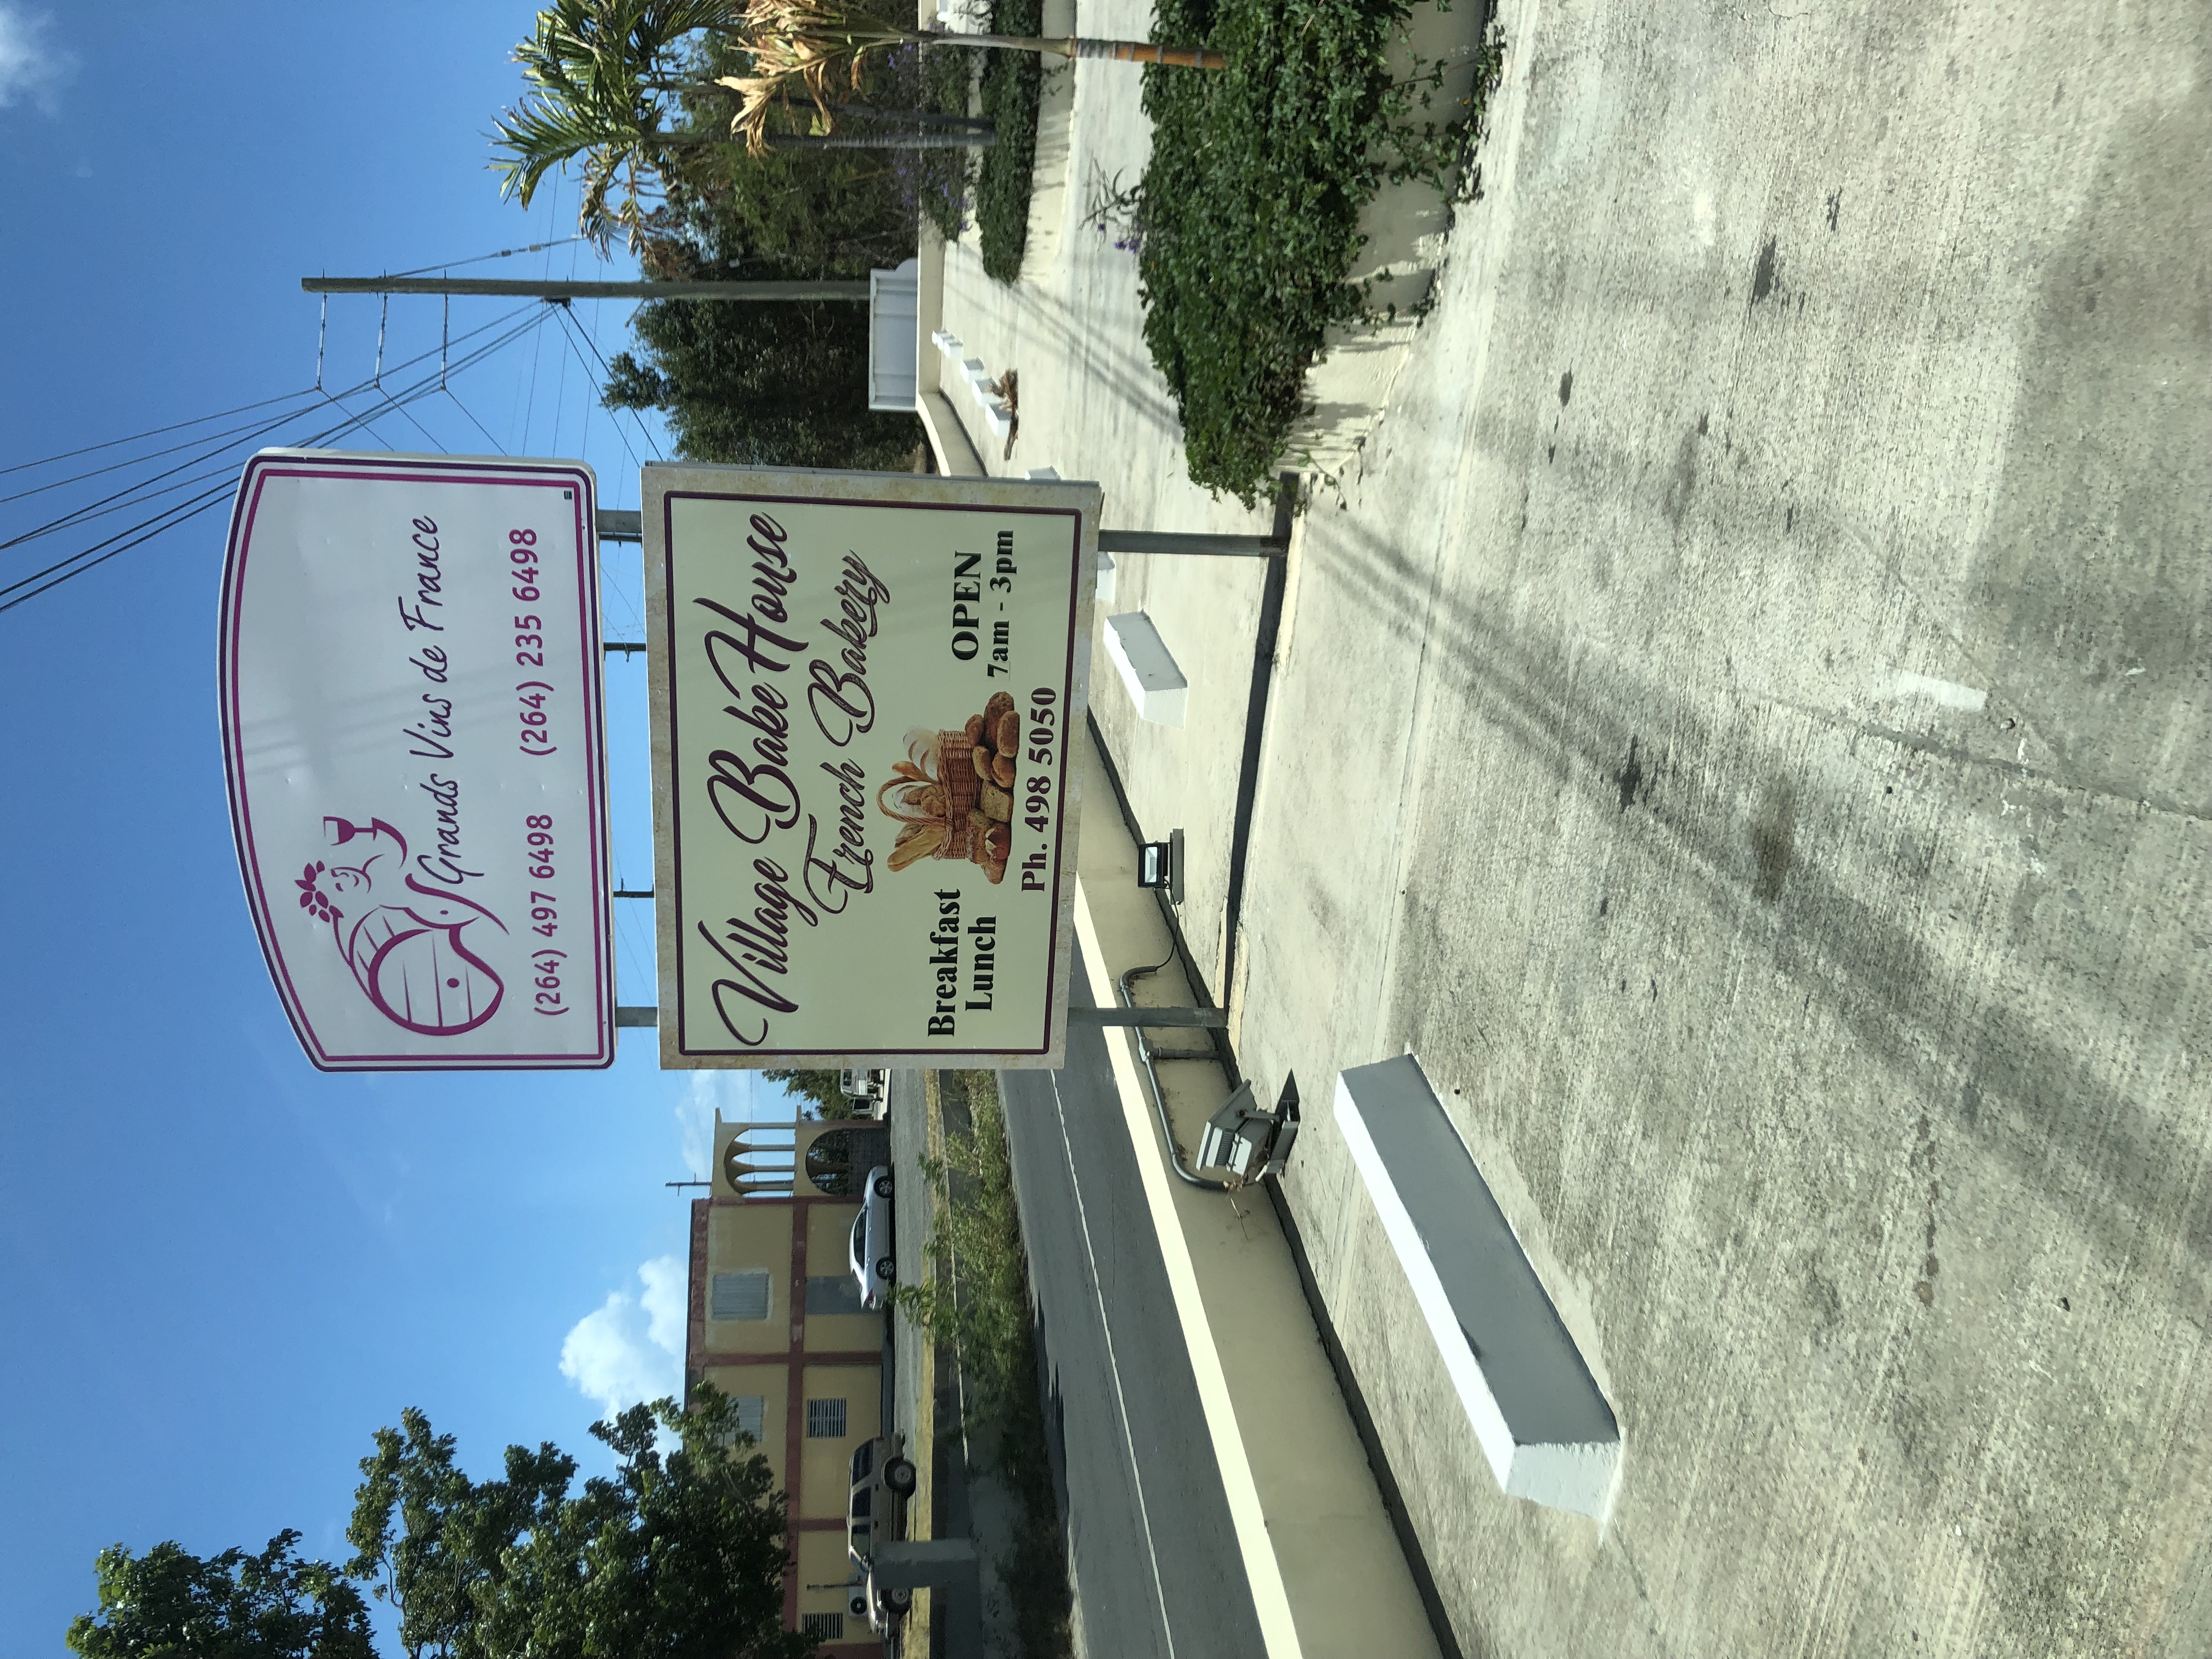 Outdoor sign at the Village Bake House in Anguilla.